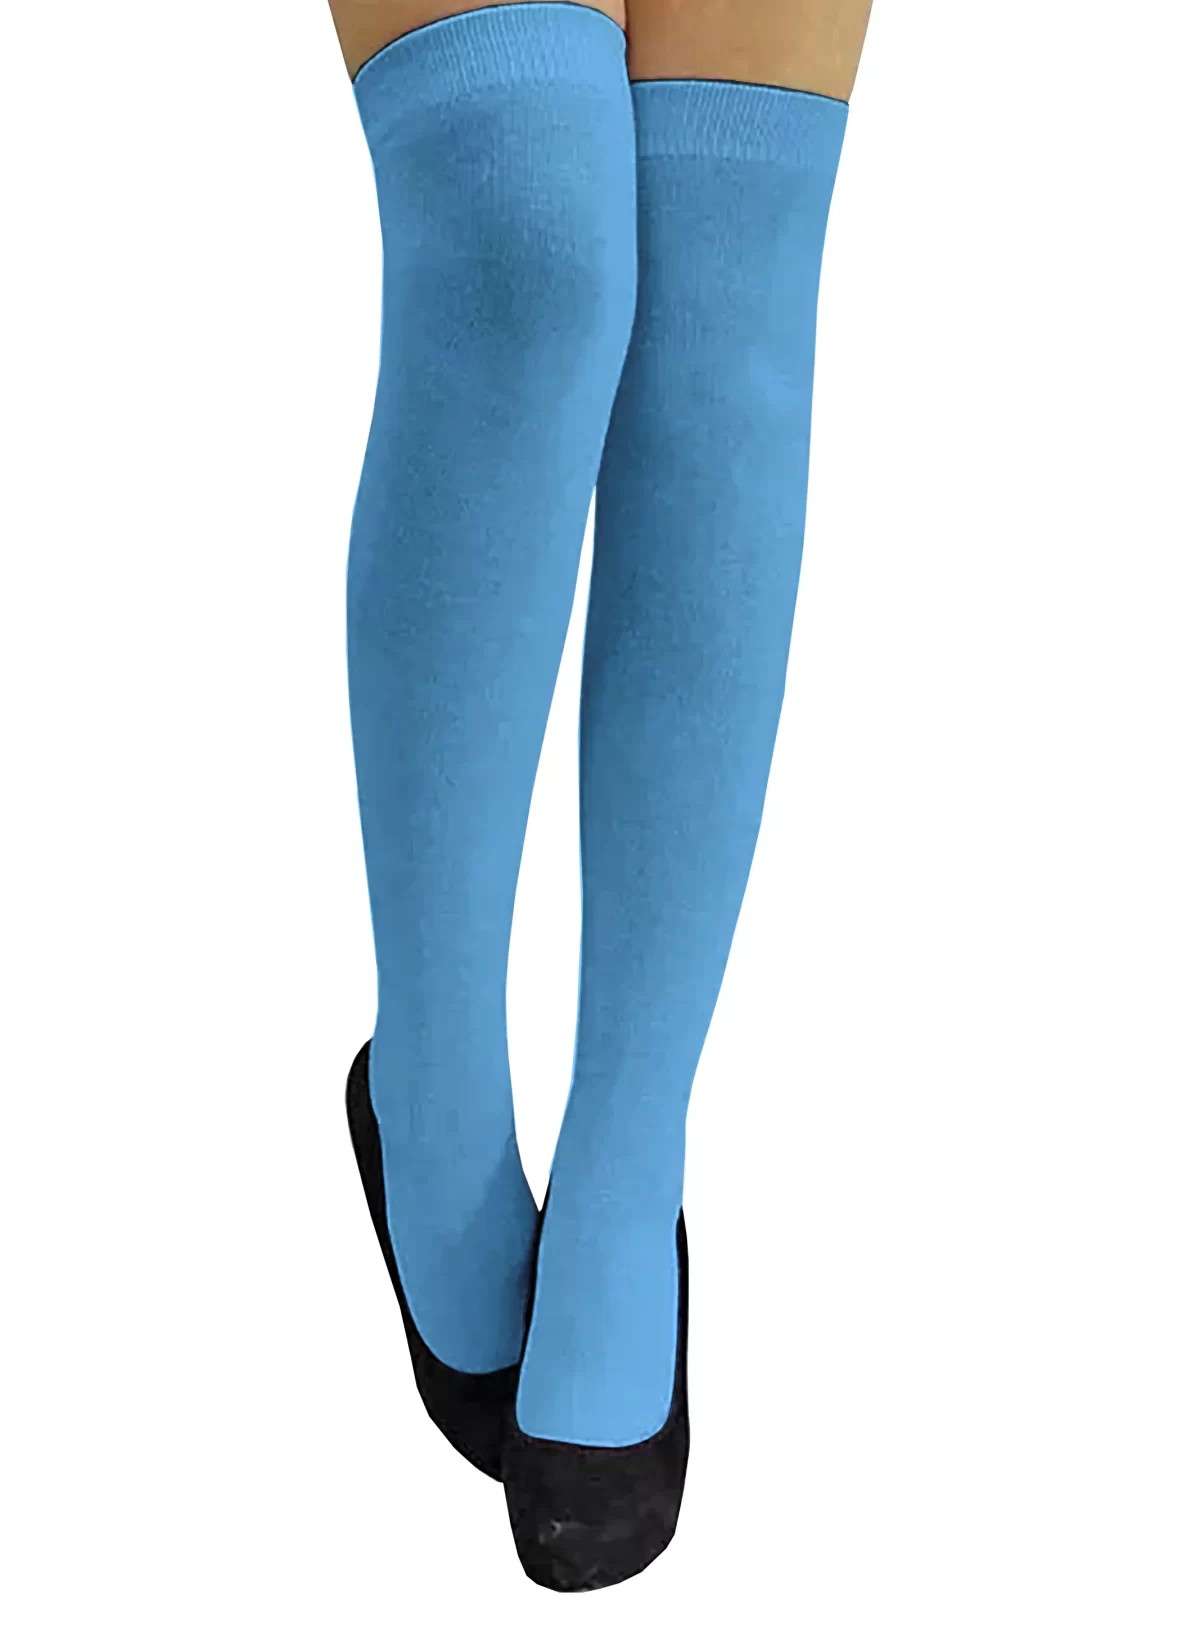 Sky Blue Girls and Women's Thigh High Stocking/Socks ( Free Size )1